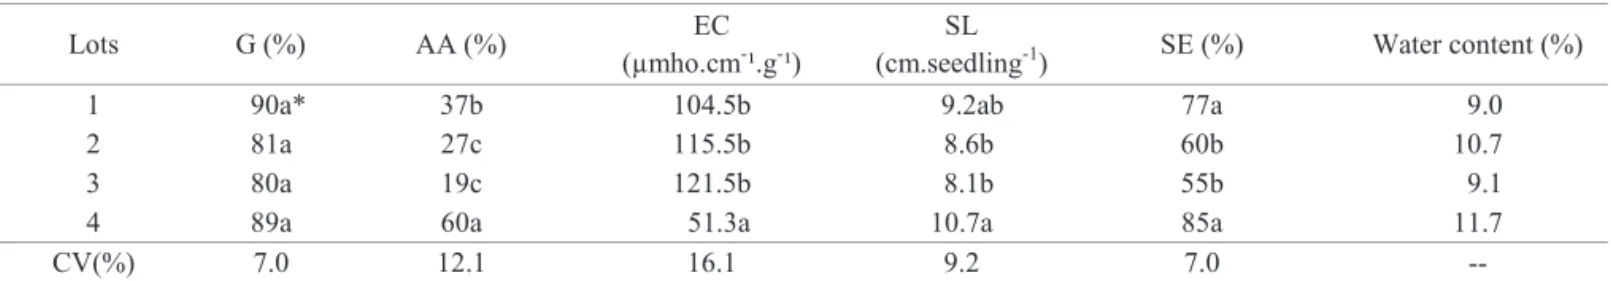 Table 2. Germination (G), accelerated aging (AA), electrical conductivity (EC), seedling length (SL), seedling emergence (SE)  and water content of four lots of pea seeds, ‘Telefone Alta’, at the beginning of storage.